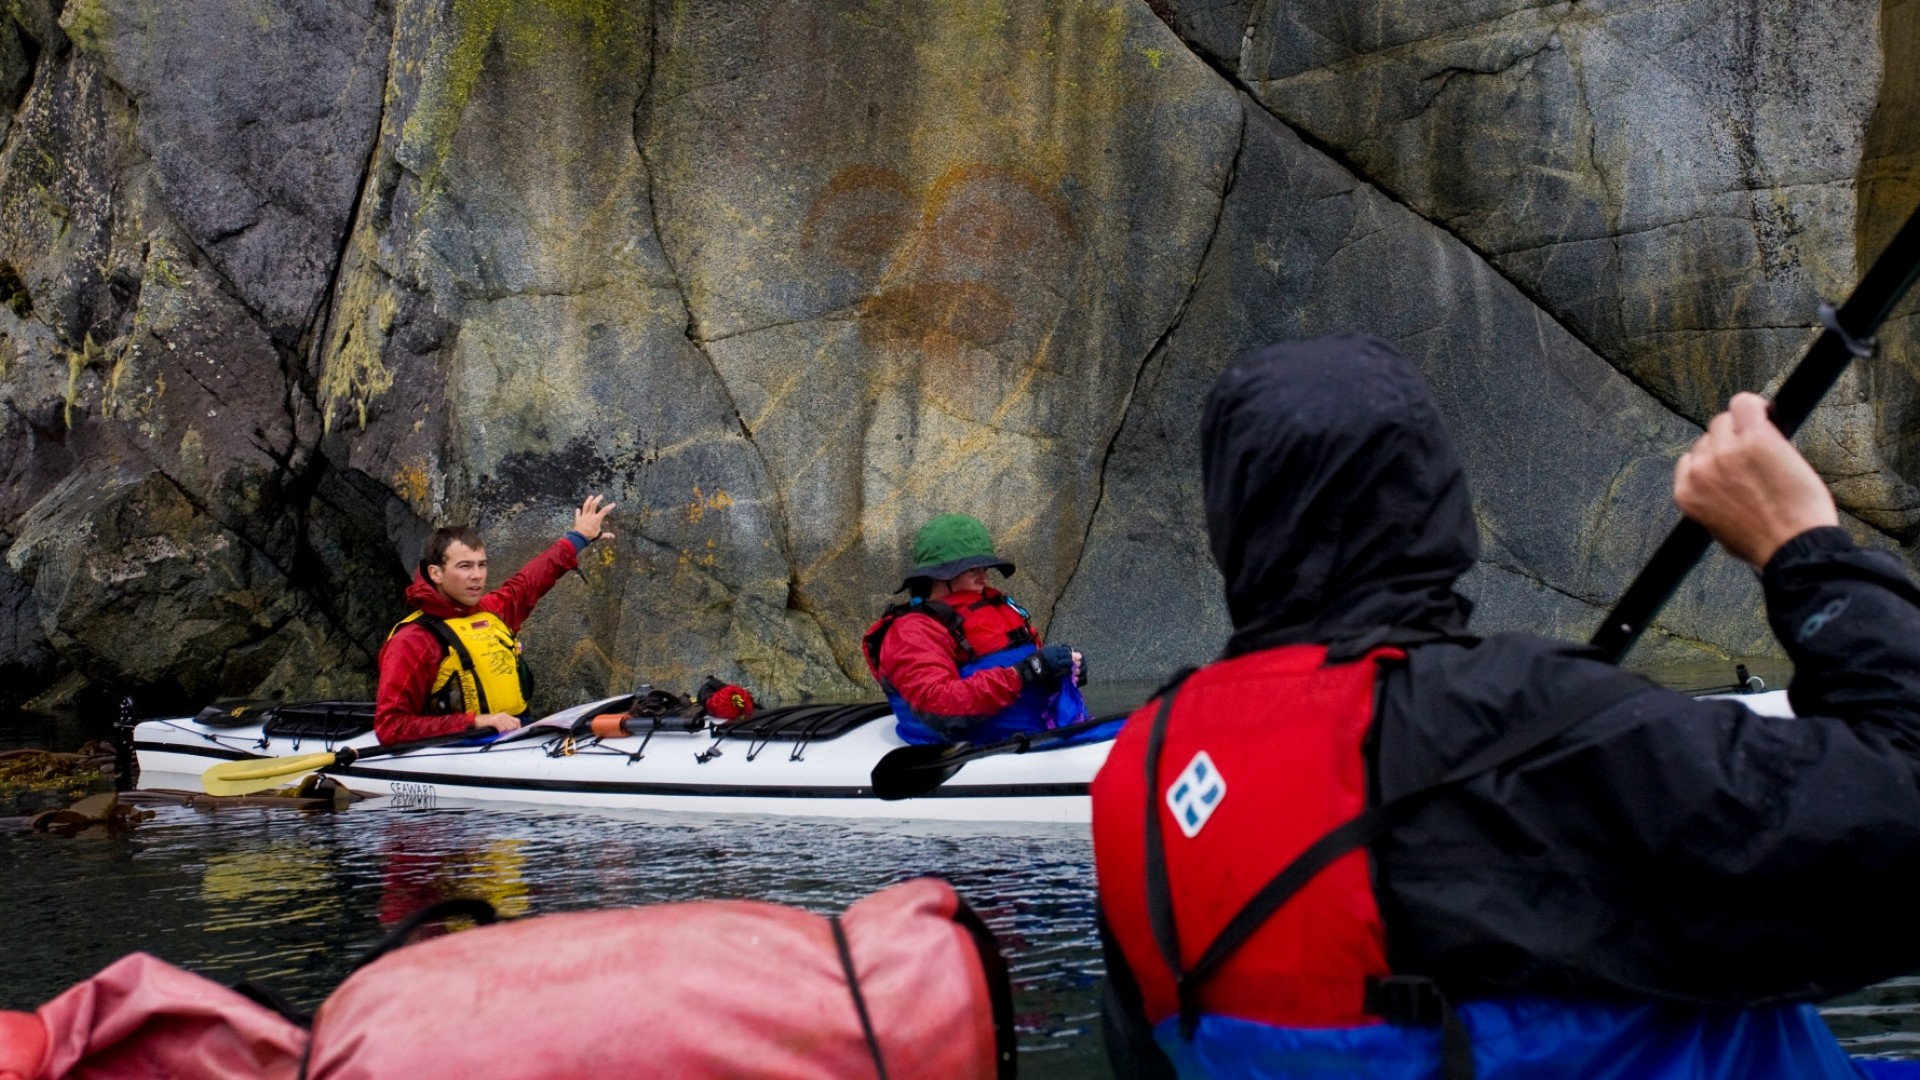 A group of sea kayakers paddling past Berry Island and admiring a pictograph on a boulder along the water